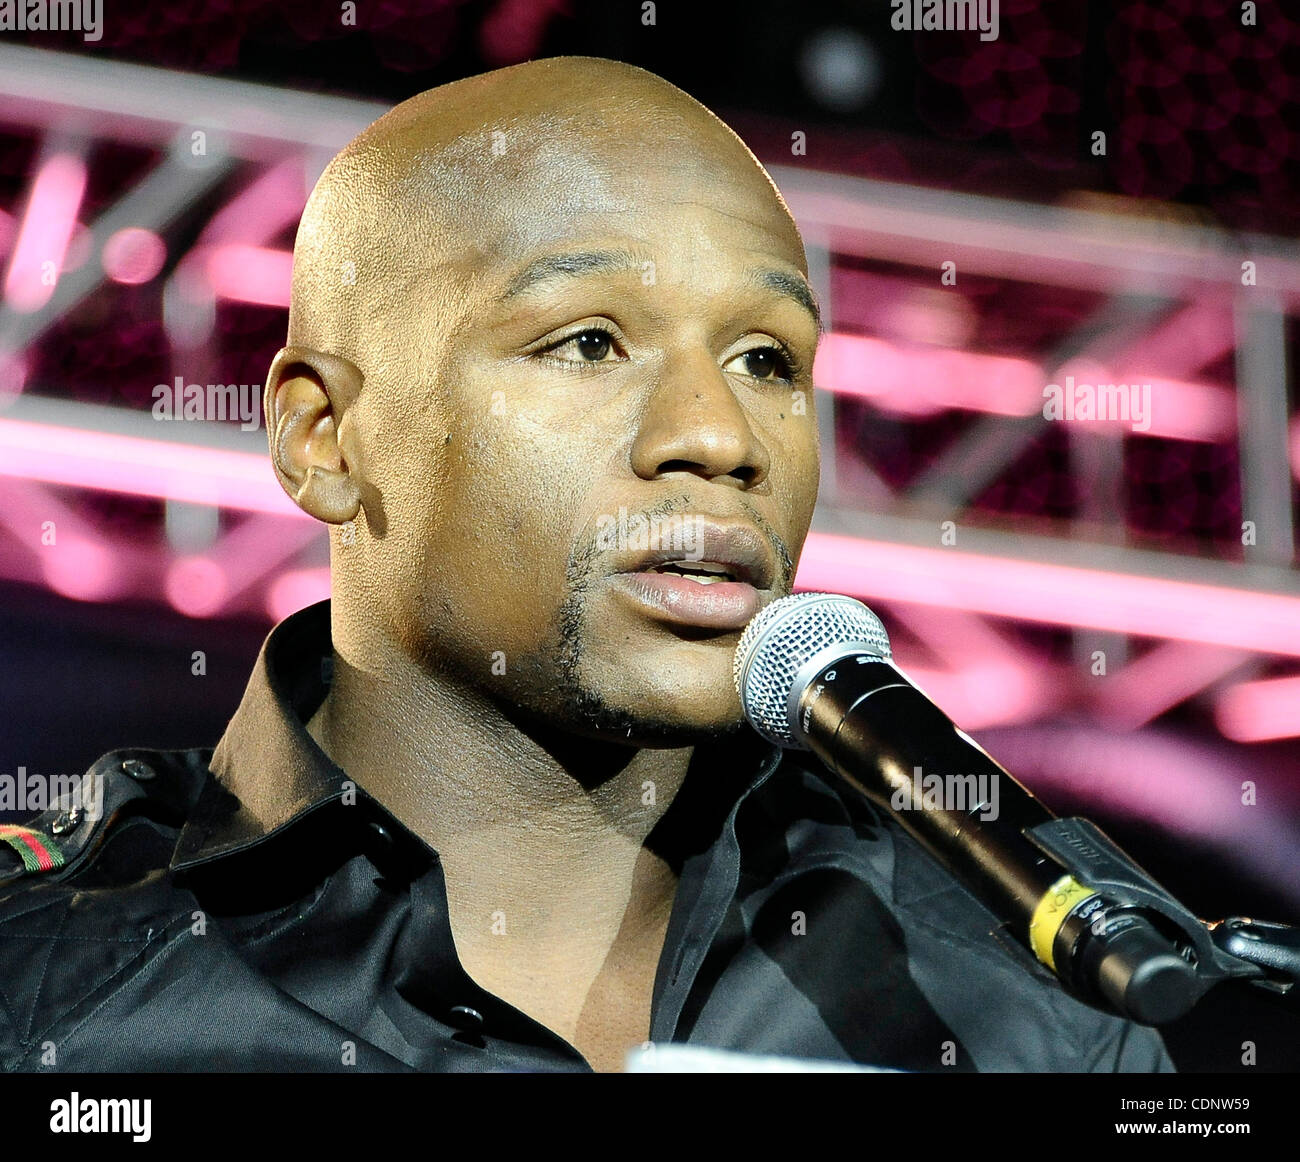 June 29,2011 - Los Angeles, California, USA. Floyd Mayweather Jr. talks at the Nokia center during a press conference on his upcoming fight  with Victor Ortiz on Sept 17th at the MGM grand hotel in Las Vegas for the WBC welterweight title. (Credit Image: © Gene Blevins/ZUMAPRESS.com) Stock Photo